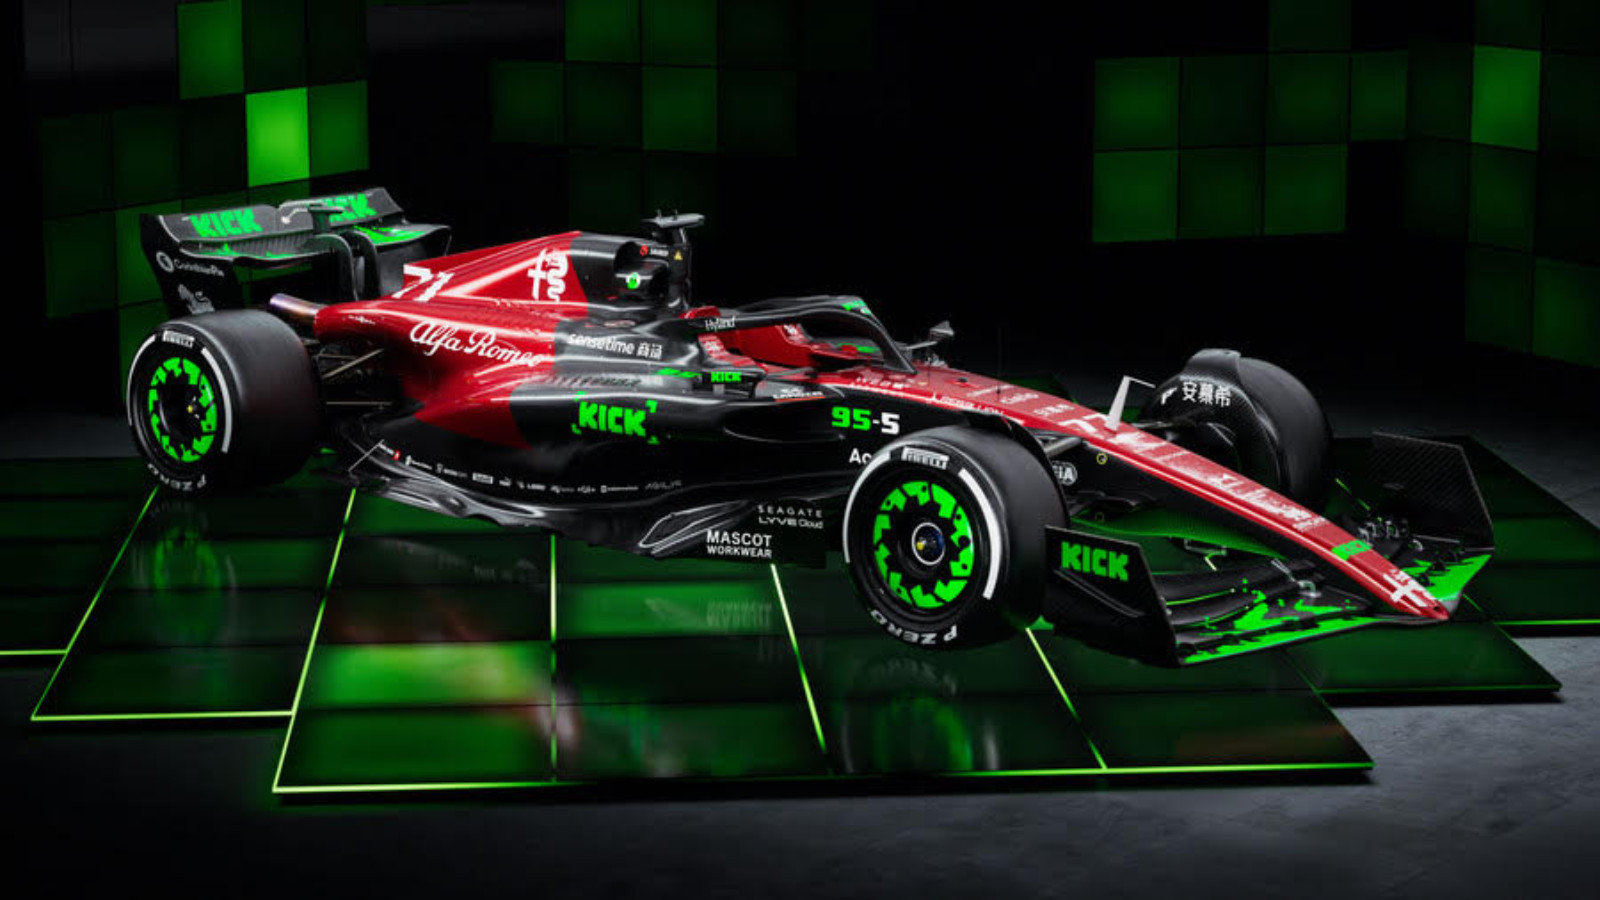 Alfa Romeo set to turn heads with new livery for Belgian Grand Prix